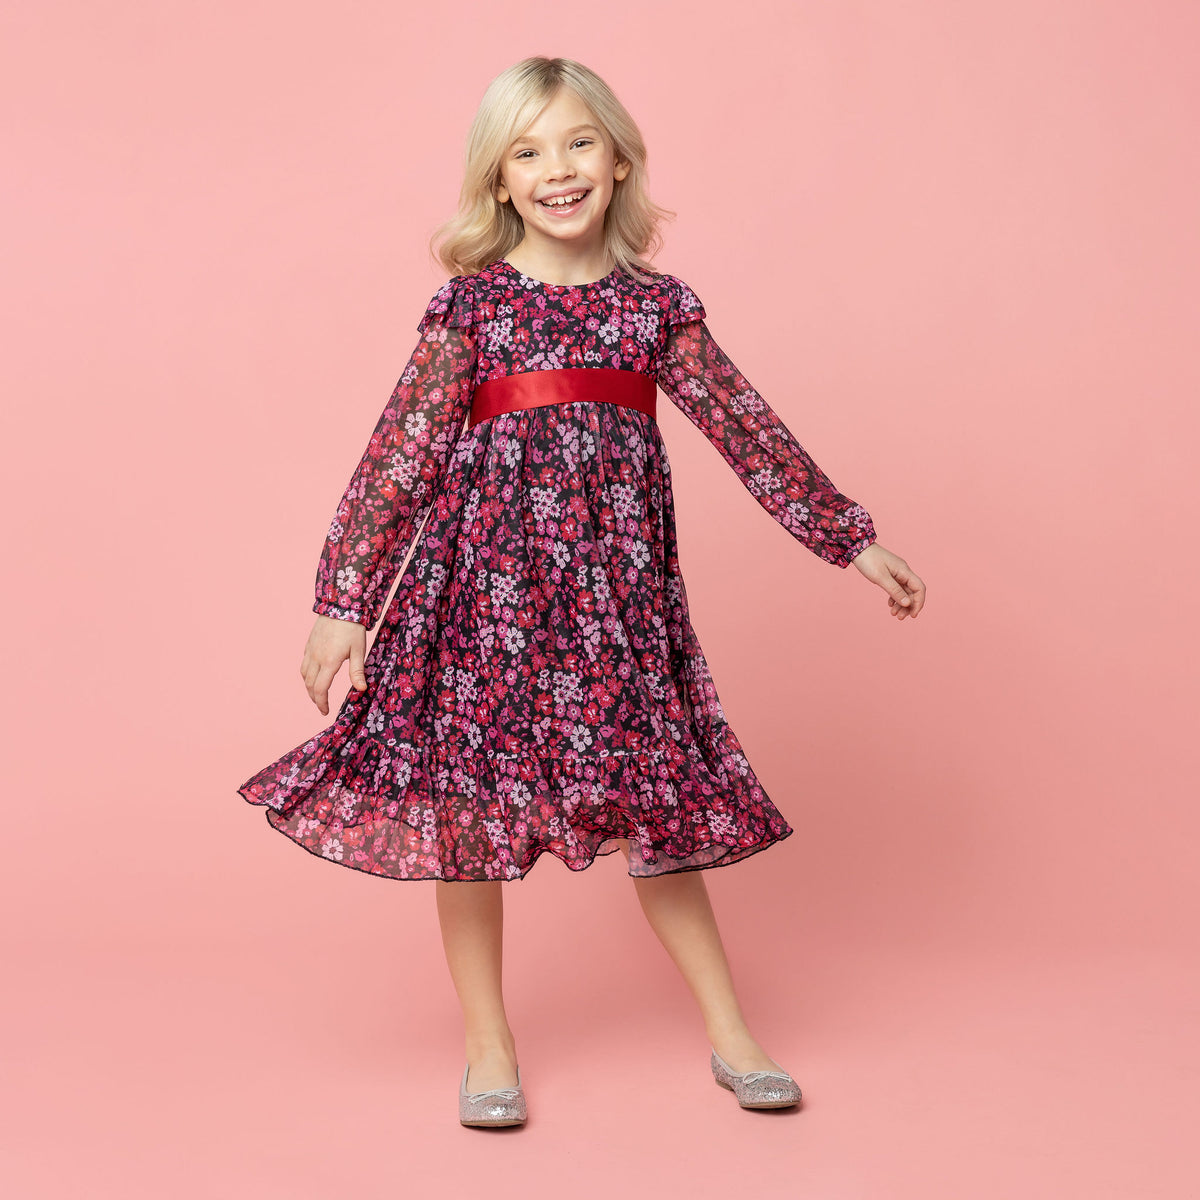 Chloe Winter Floral Girls Party Dress Pink | Holly Hastie London